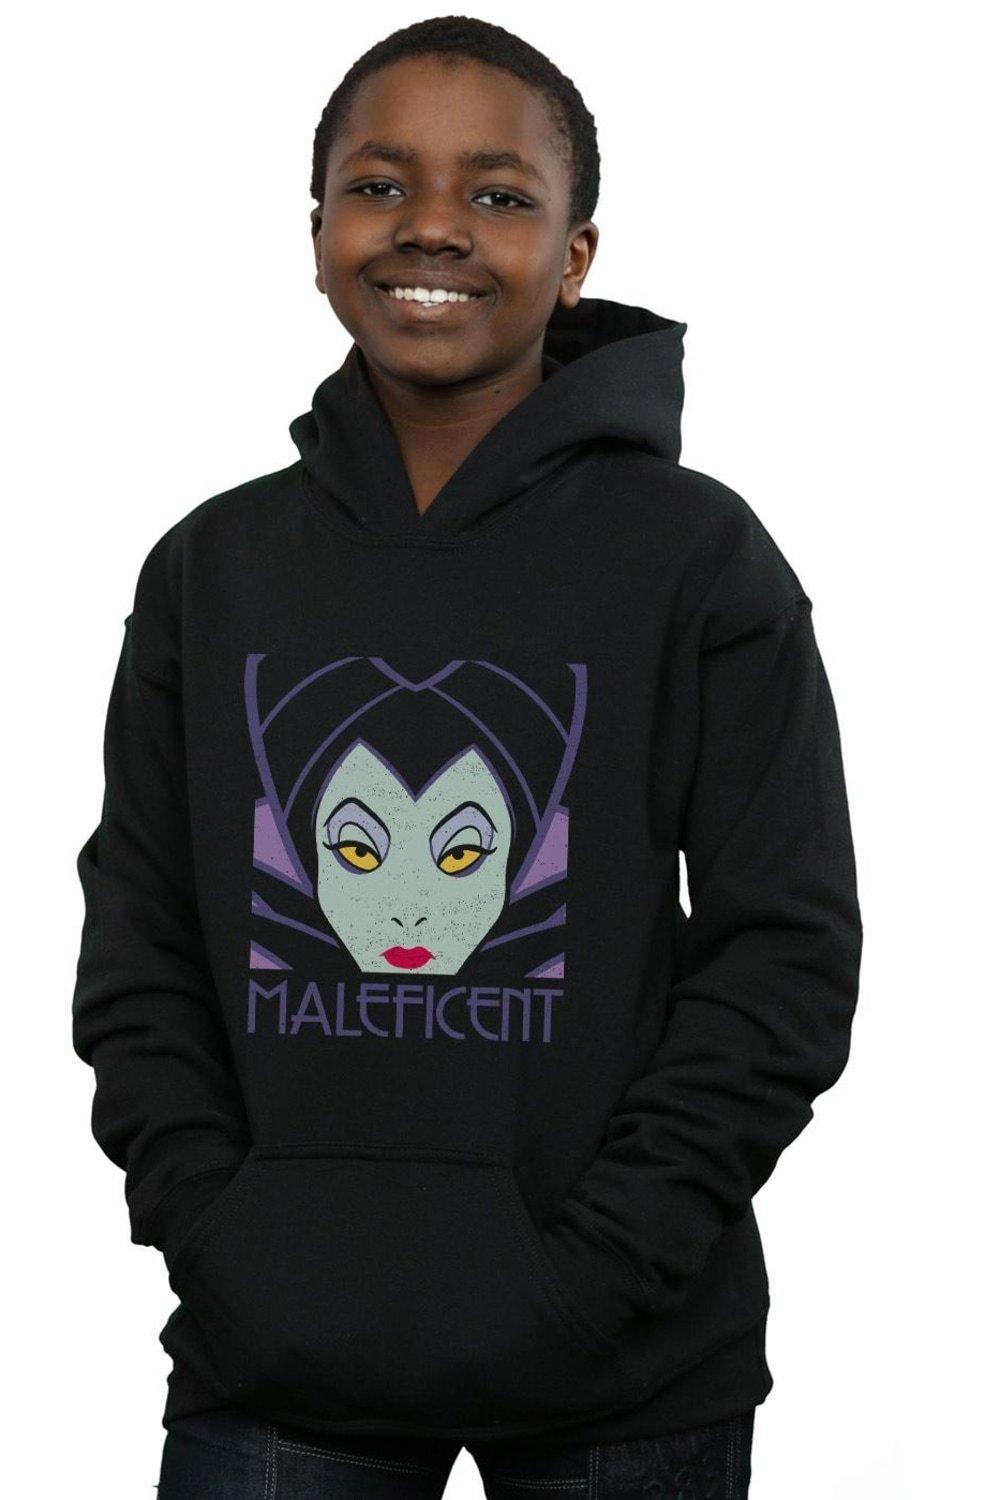 Maleficent Cropped Head Hoodie